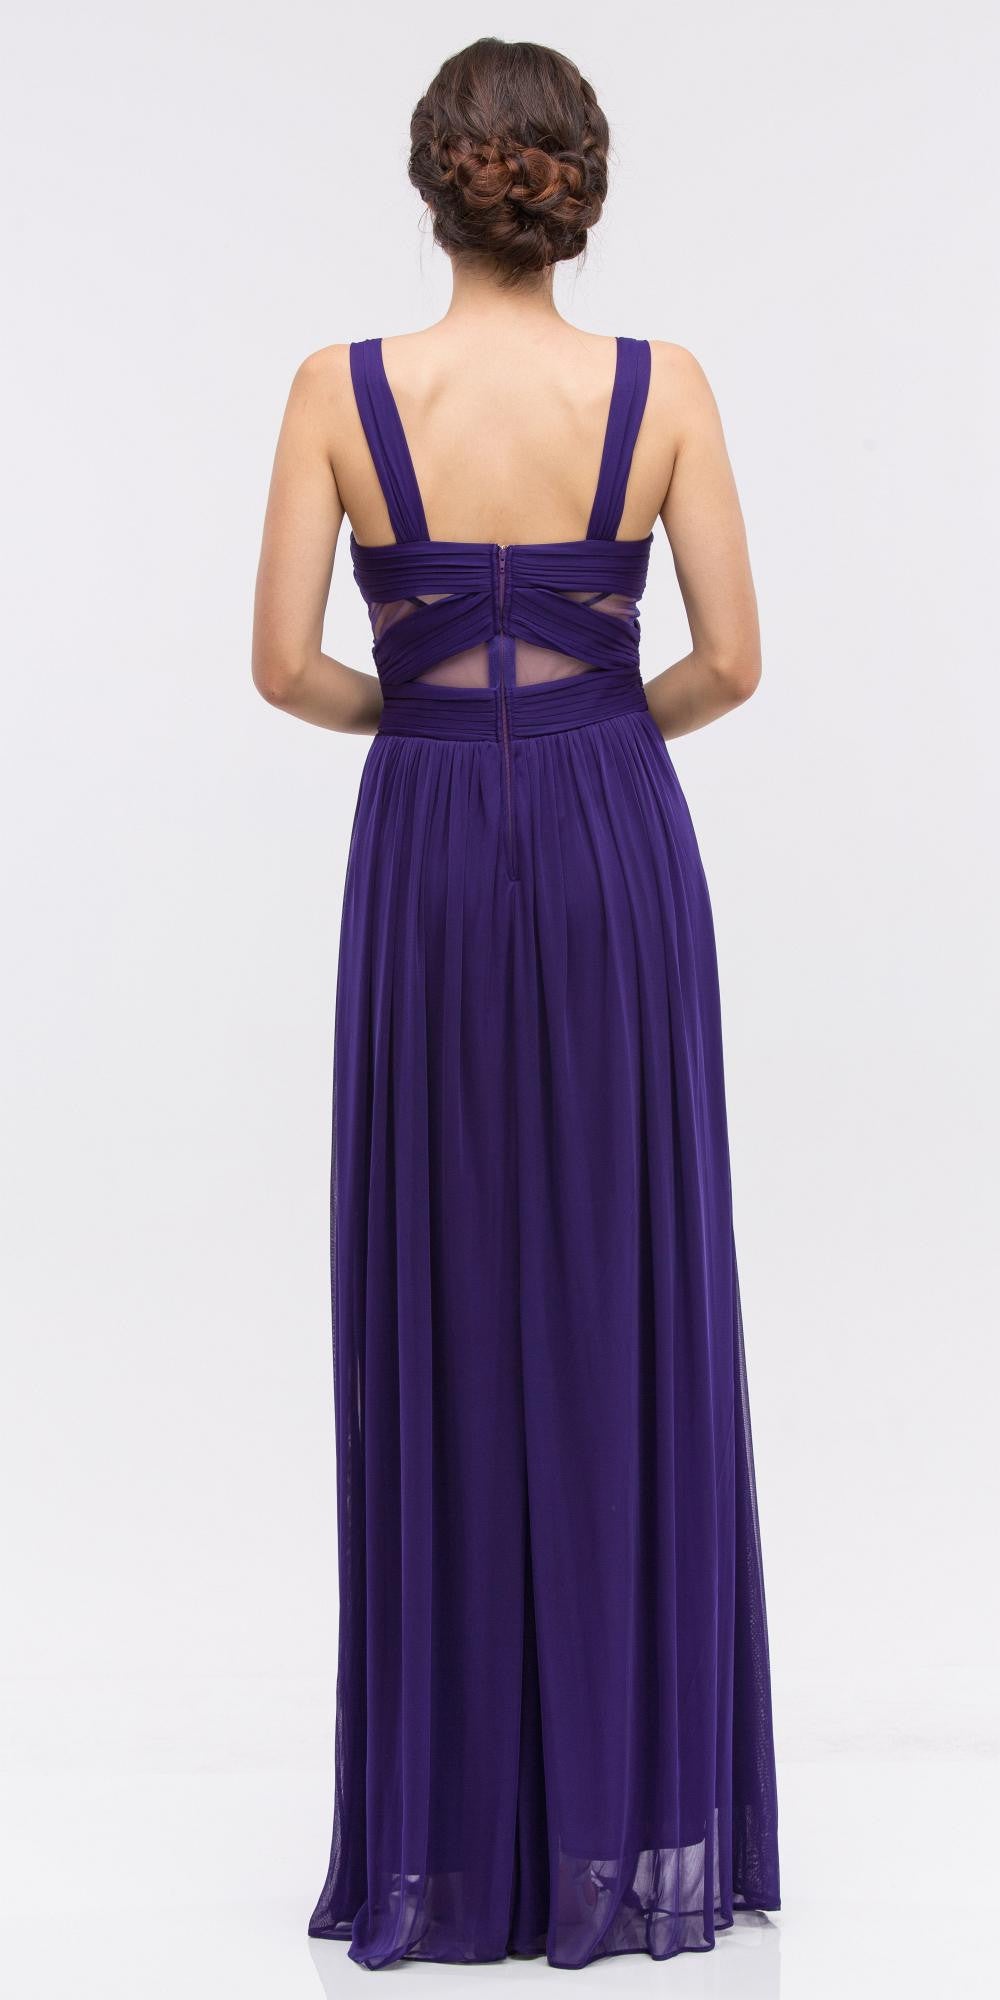 Purple Prom Gown Ruched Bodice Sweetheart Neckline Cut-Out Midriff